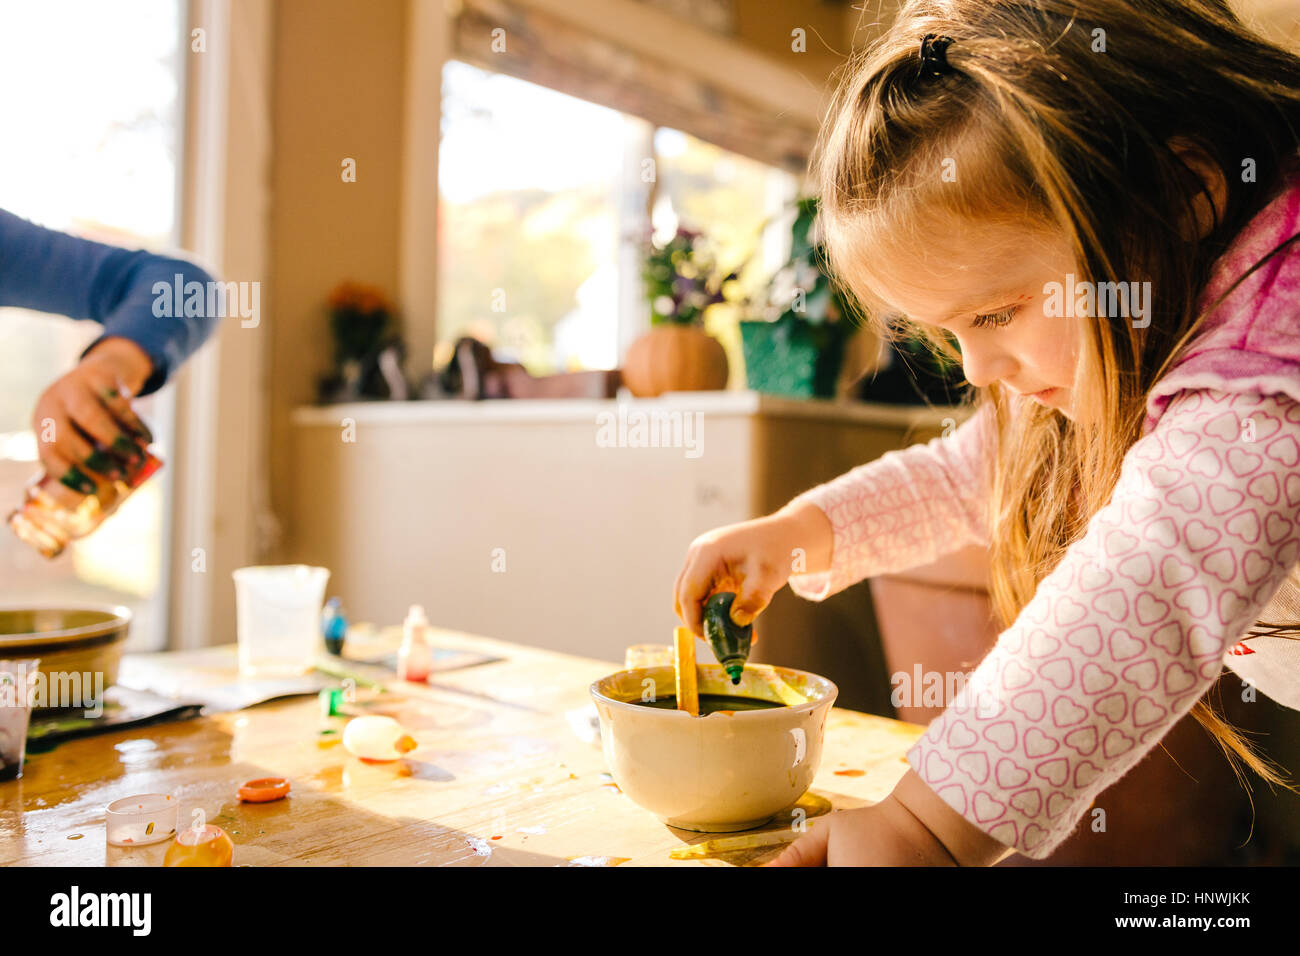 Girl doing science experiment, dropping green liquid into bowl Stock Photo